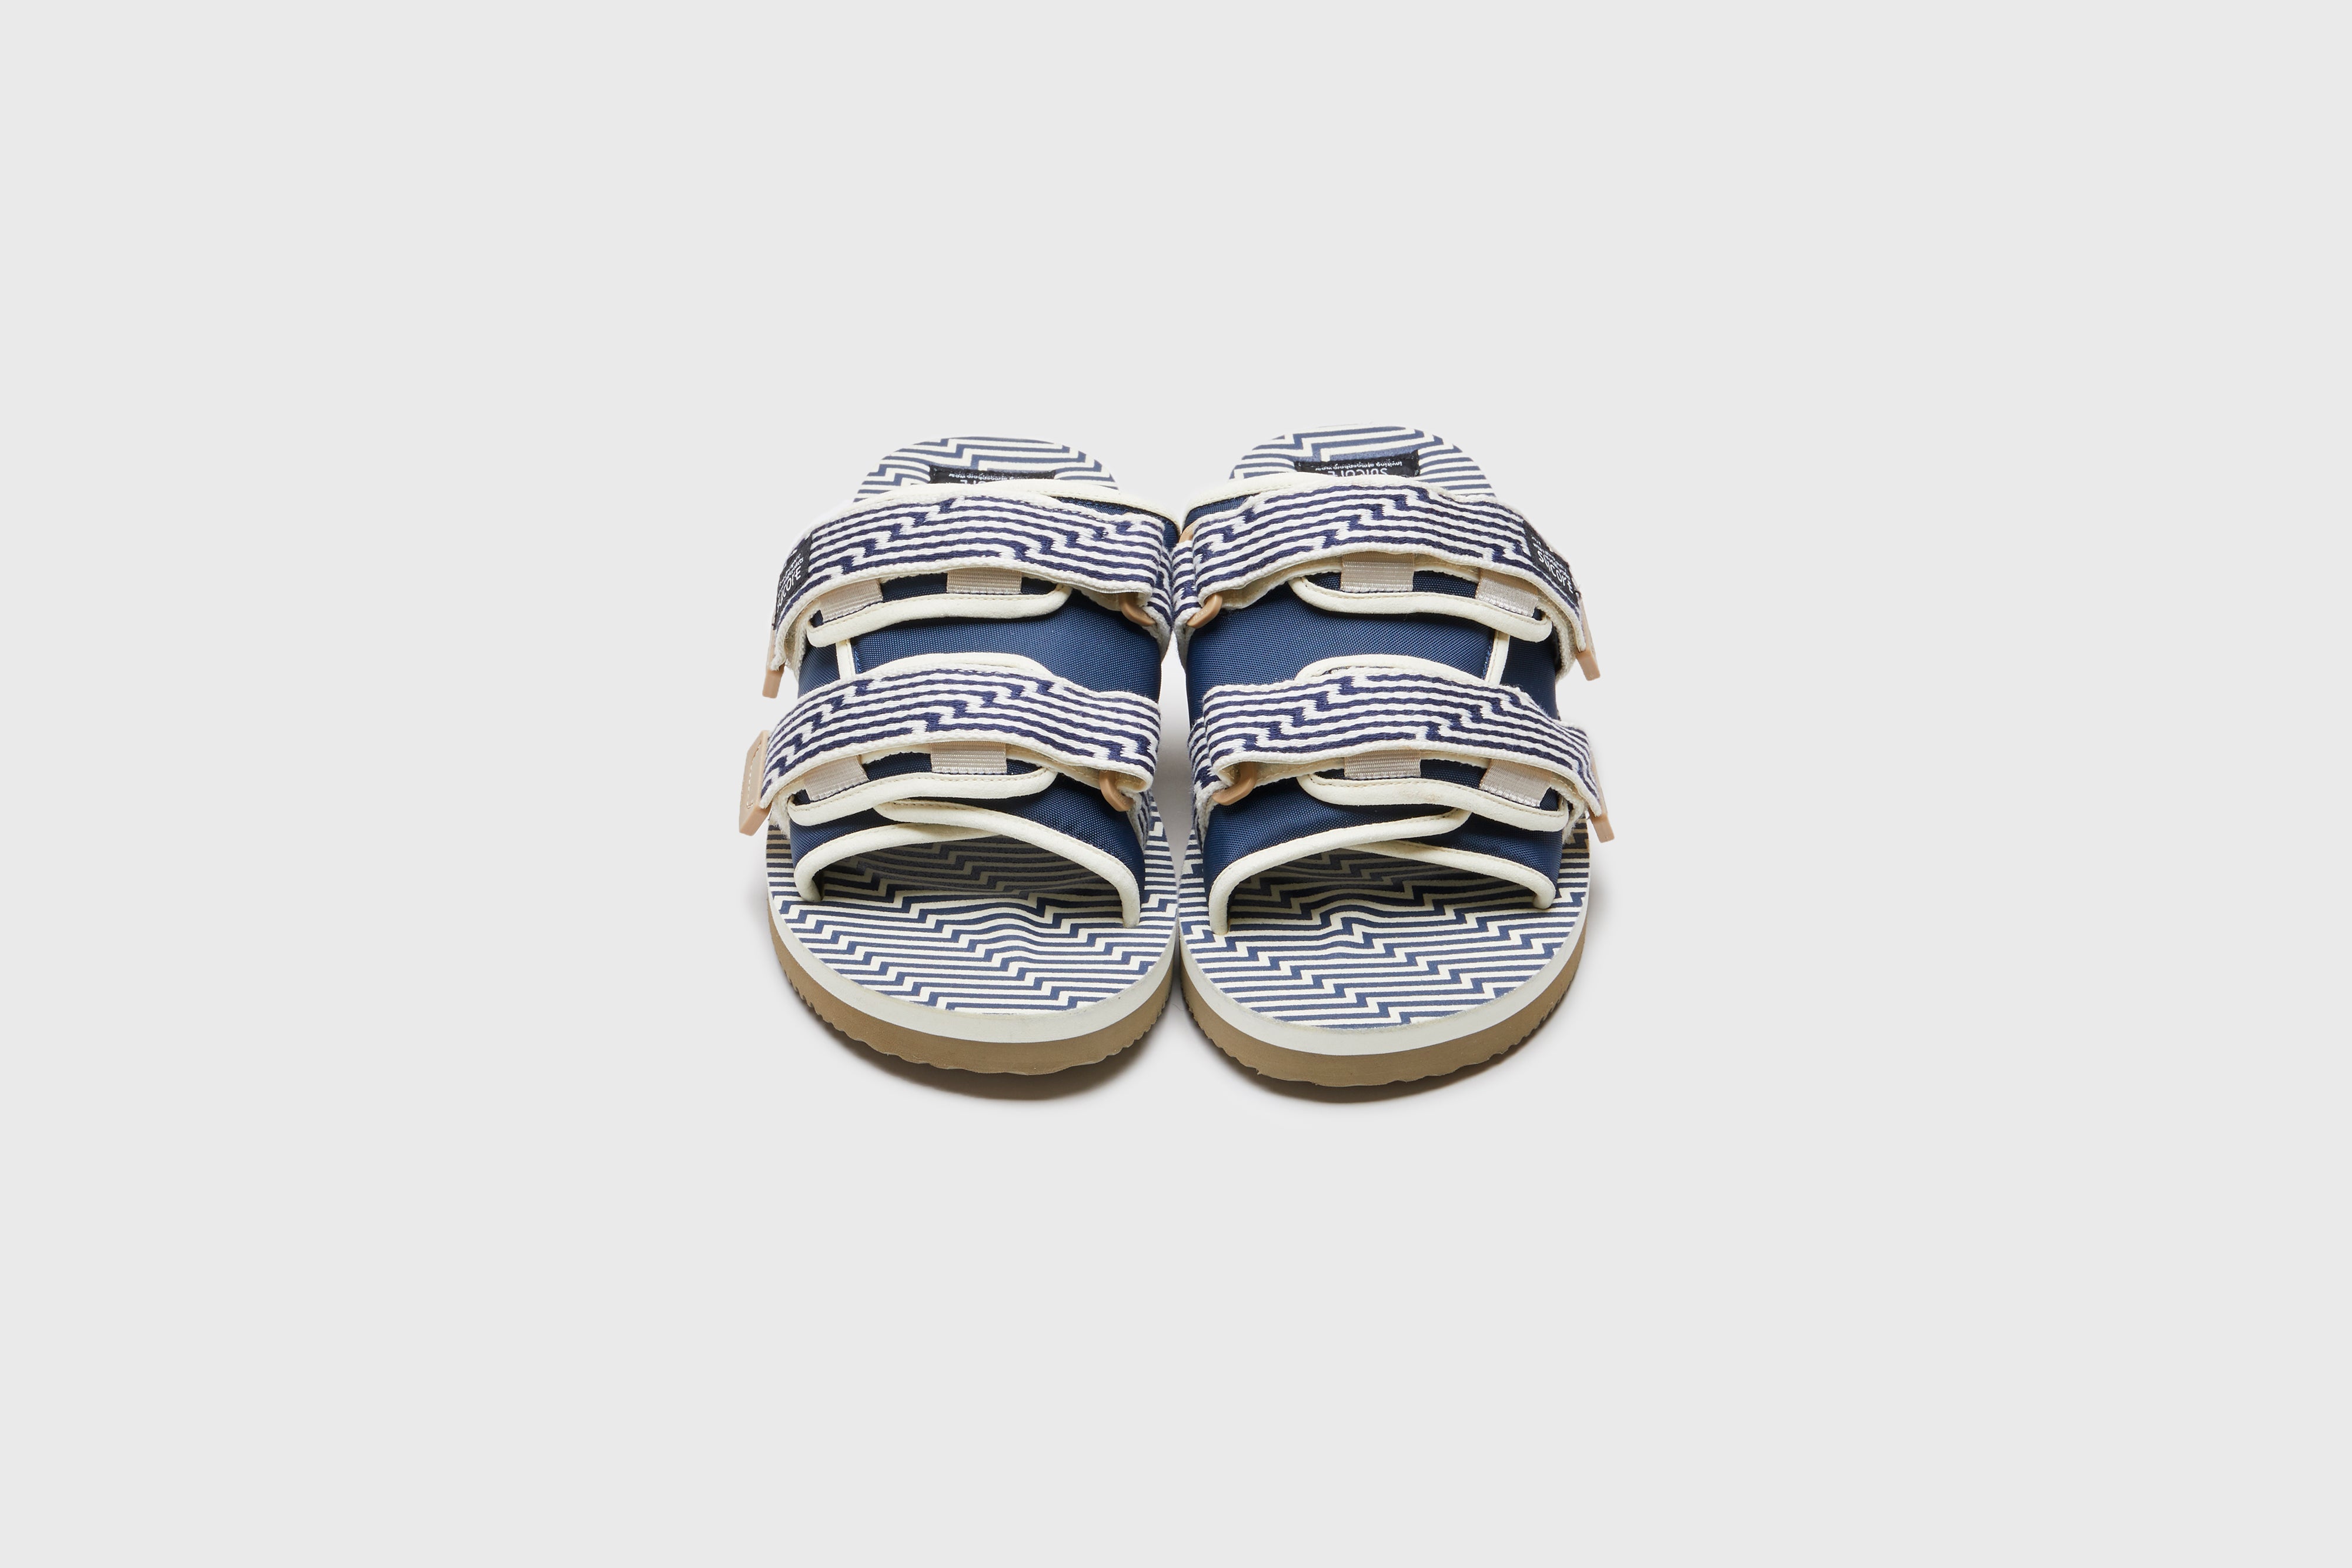 SUICOKE MOTO-JC01 slides with ivory &amp; navy nylon upper, ivory &amp; navy midsole and sole, strap and logo patch. From Spring/Summer 2023 collection on eightywingold Web Store, an official partner of SUICOKE. OG-056-JC01 IVORY X NAVY